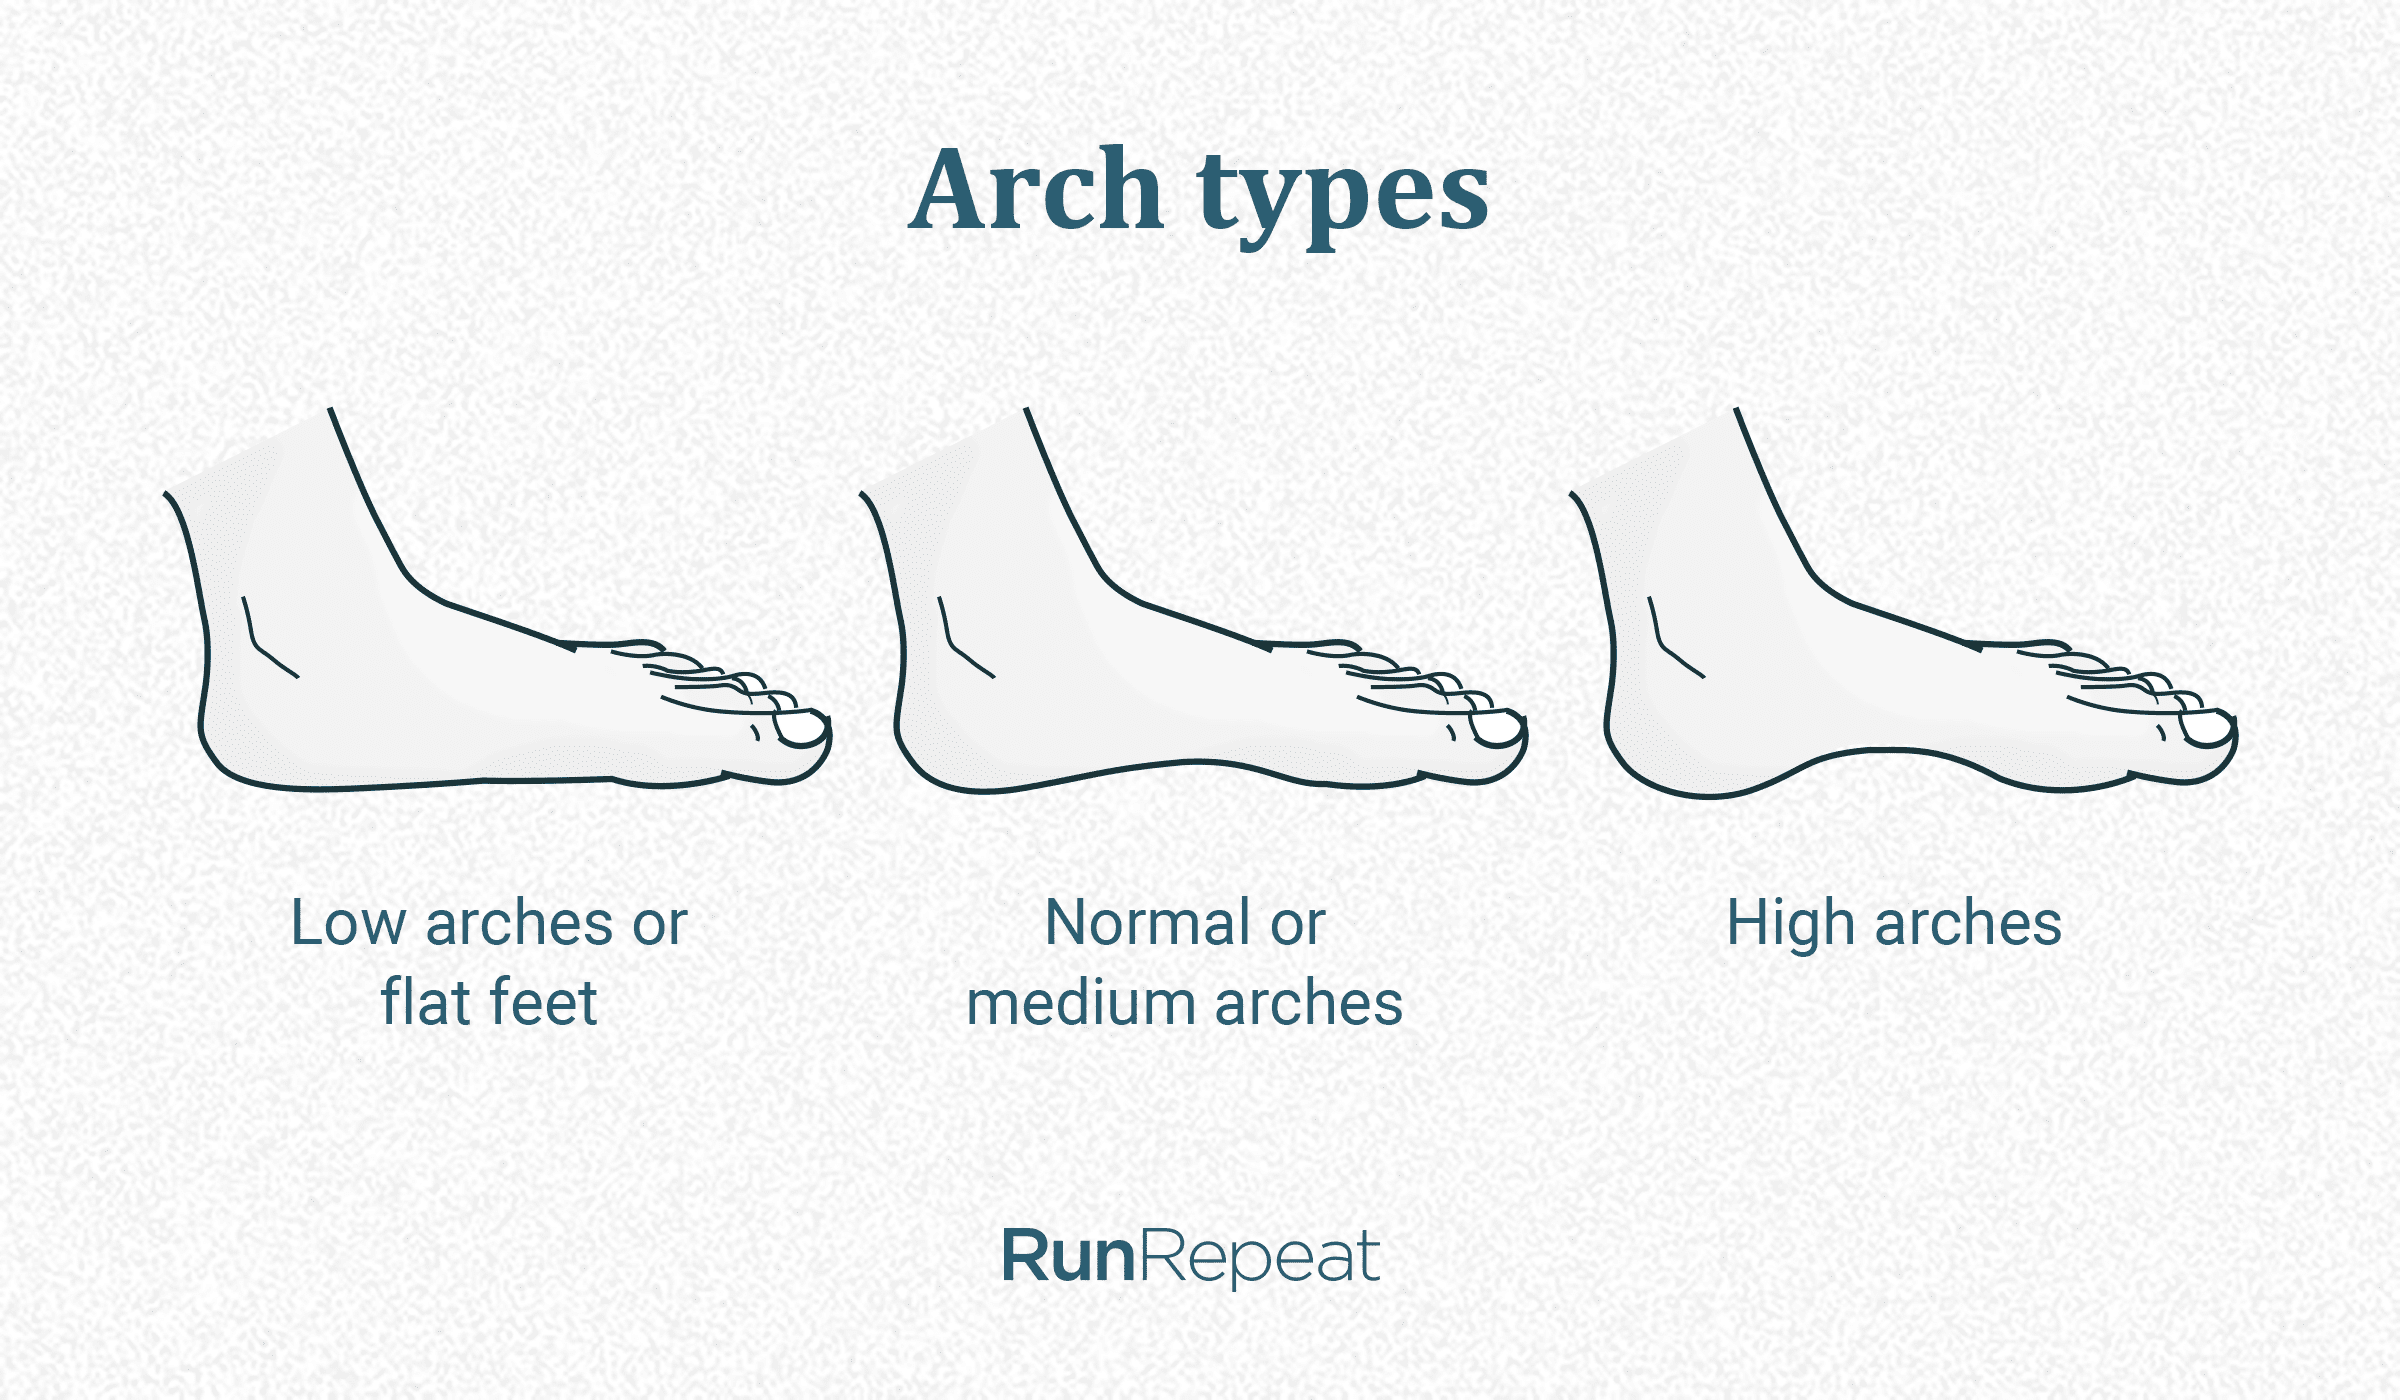 support for high arch feet